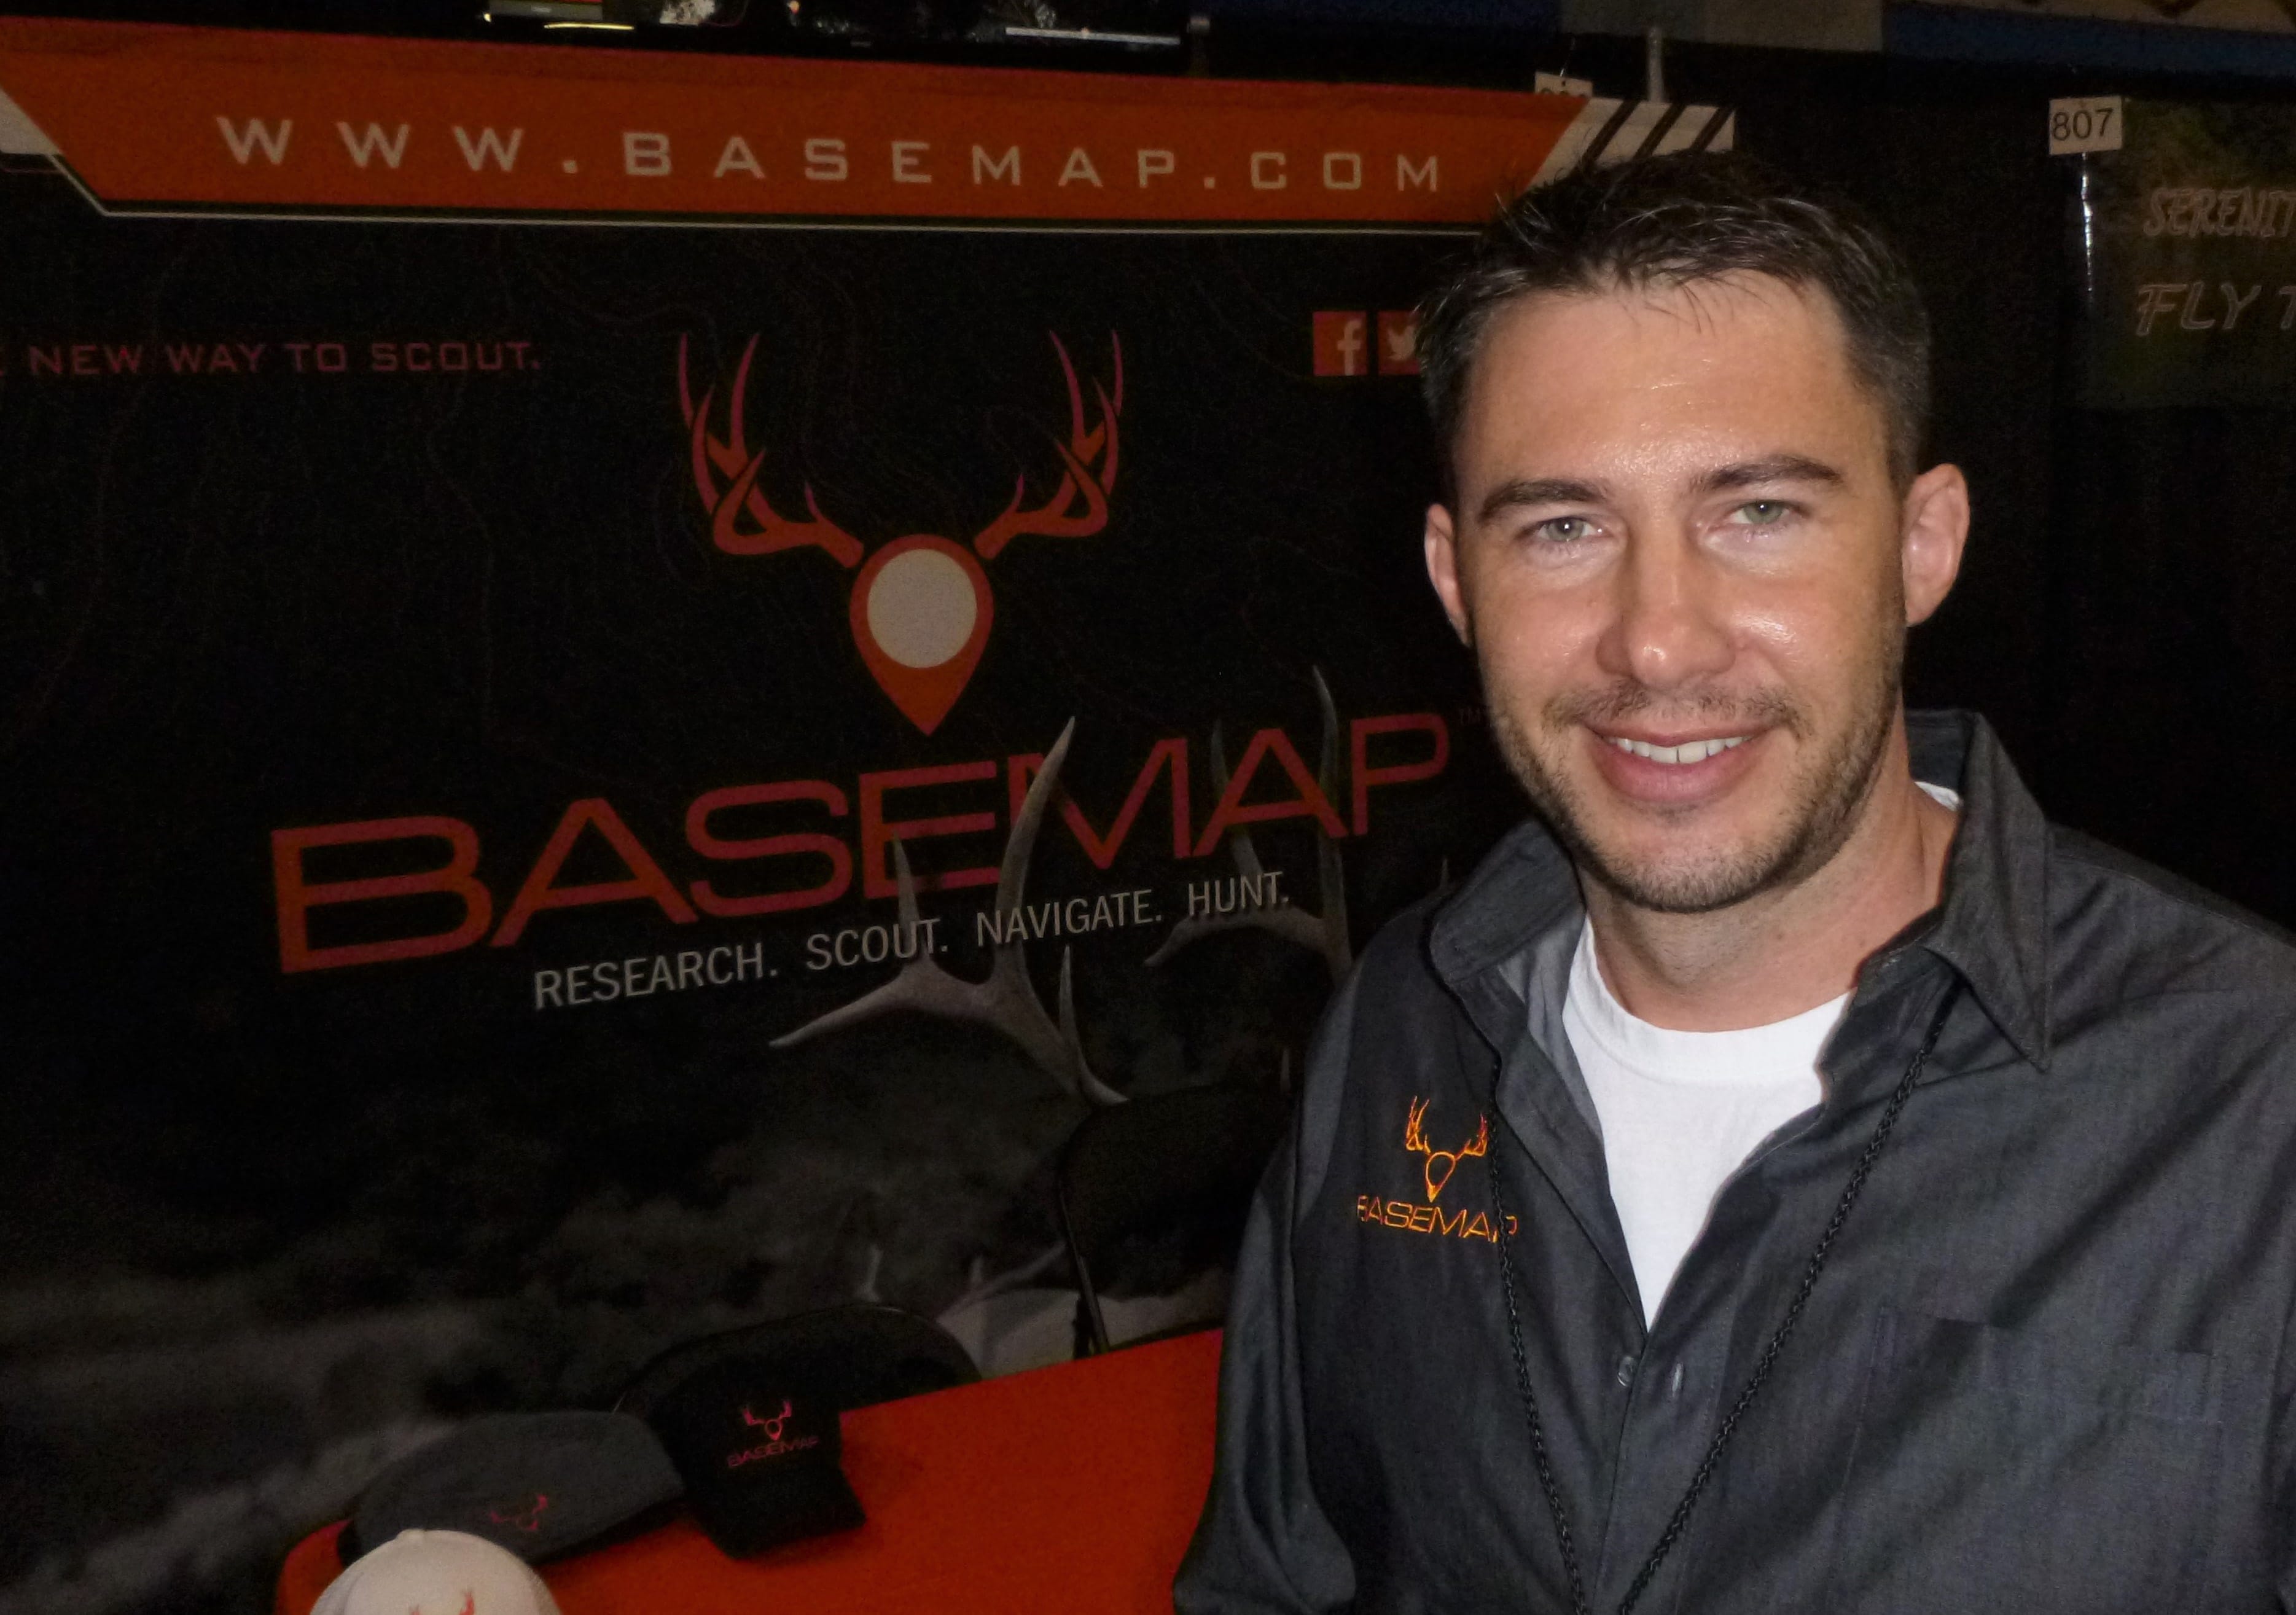 Jeff Balch: "I've always had a huge passion for the outdoors and backcountry.